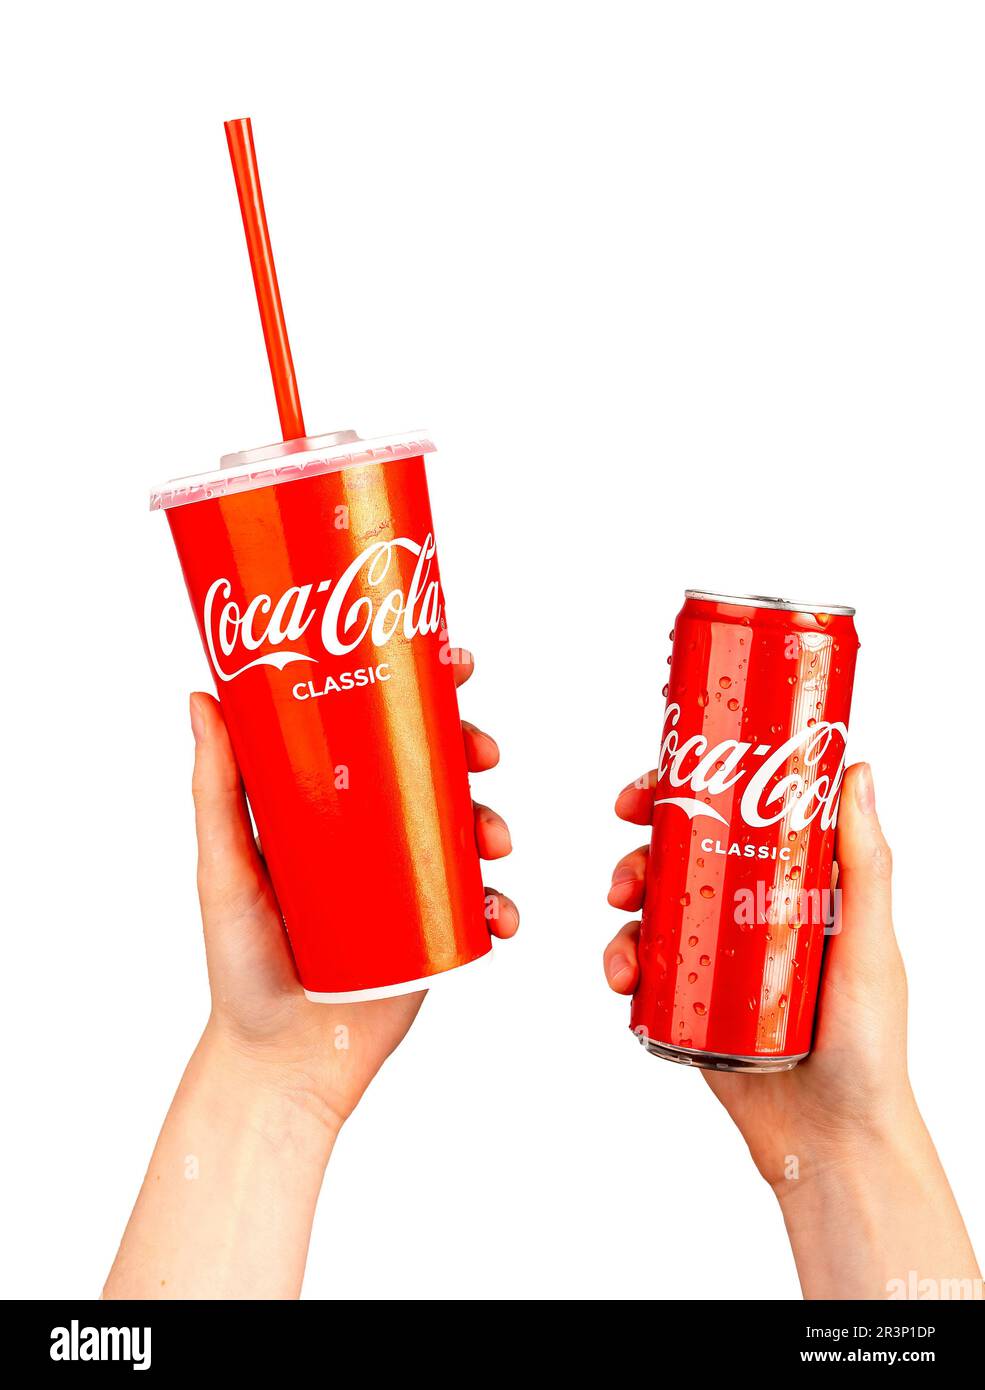 https://c8.alamy.com/comp/2R3P1DP/berlin-germany-may-23-2023-hands-holding-cola-drinks-in-red-packages-takeaway-paper-cup-mug-with-straw-and-can-tin-isolated-on-white-2R3P1DP.jpg